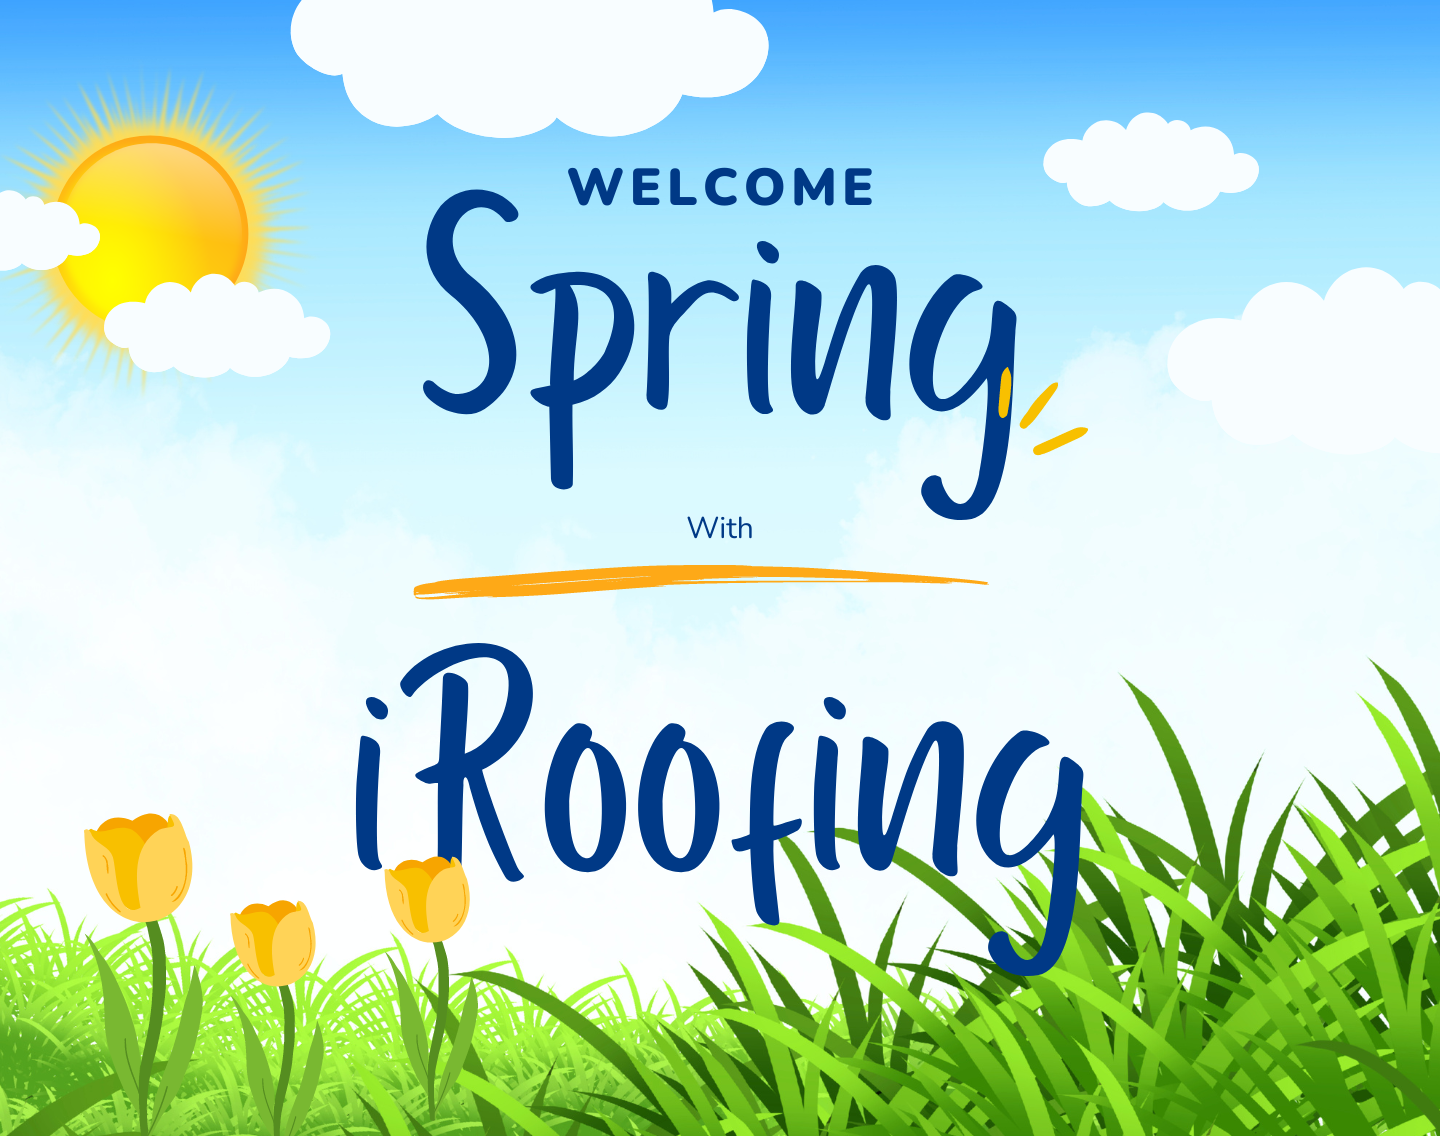 Preparing For The Spring Roofing Season With iRoofing